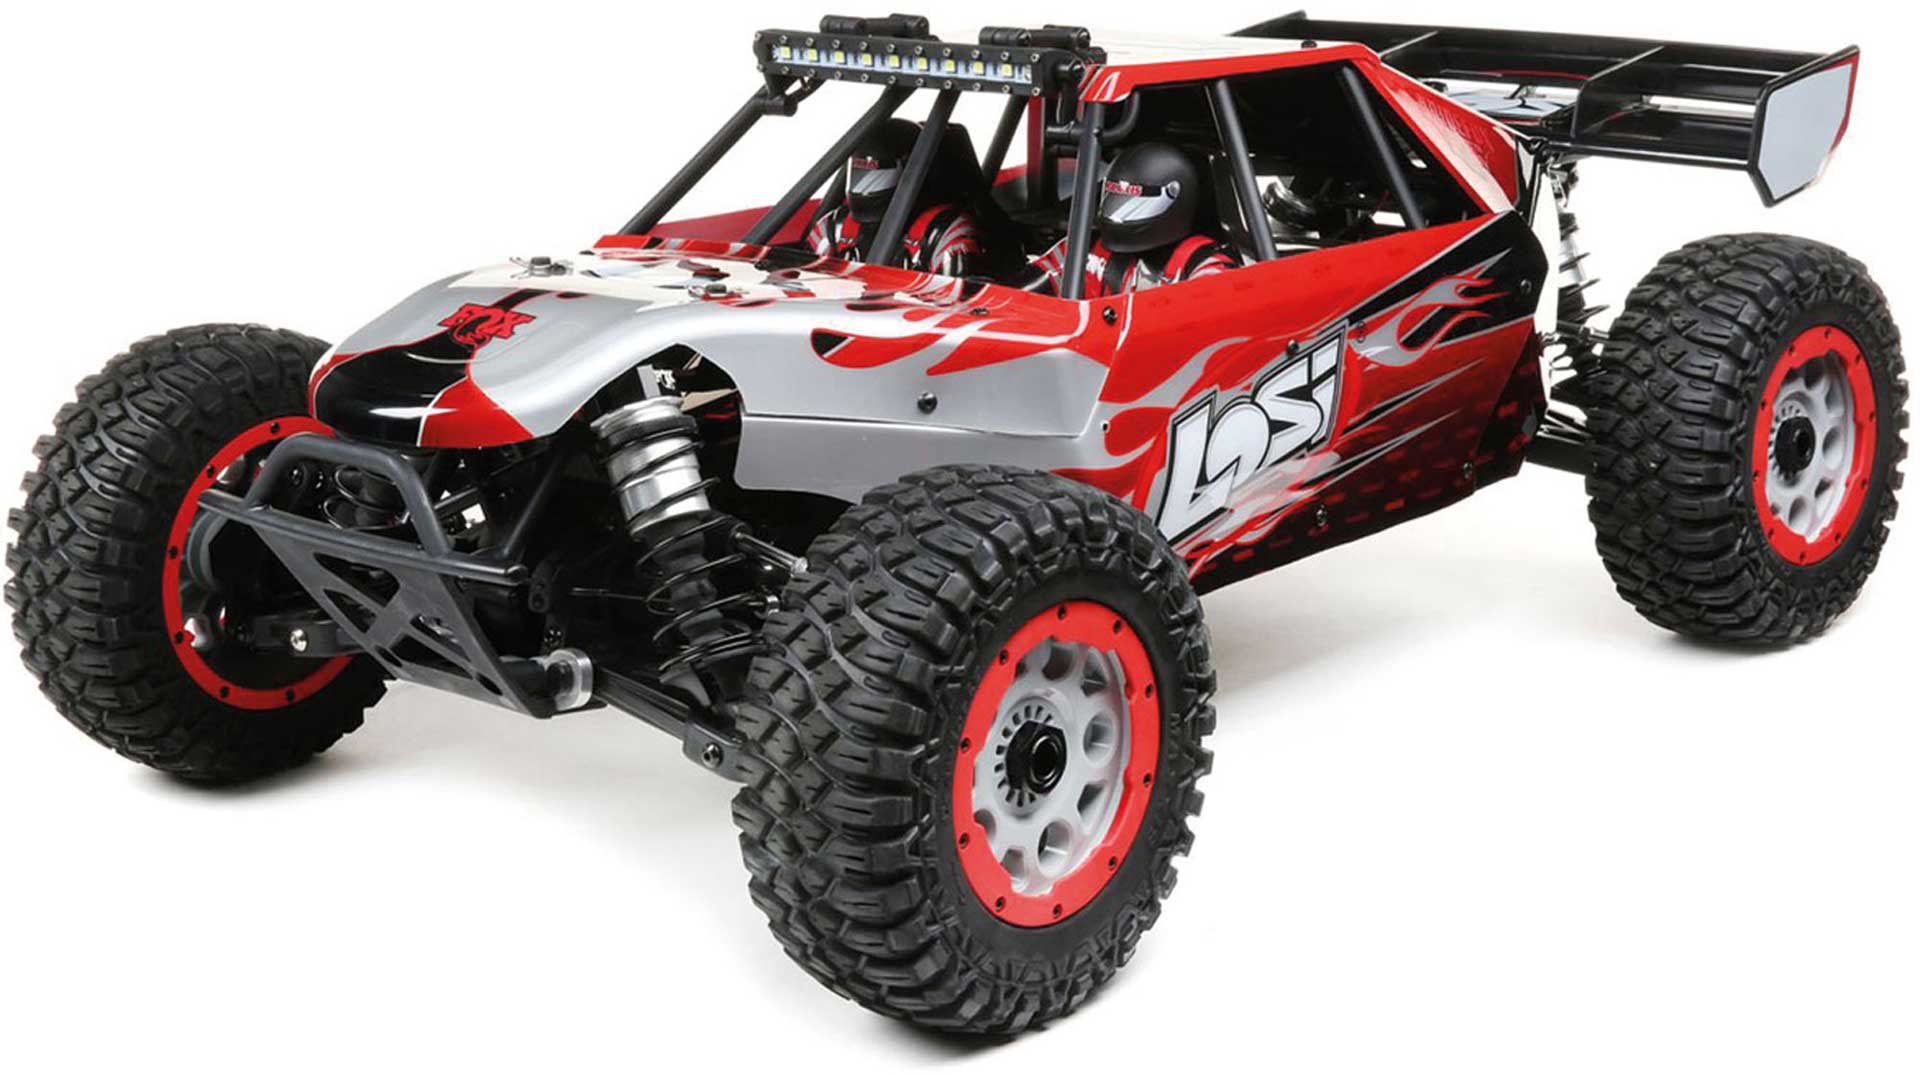 LOSI DBXL-E 2.0 BEAST DESERT BUGGY 4WD 1/5 WITH SMART TECHNOLOGY